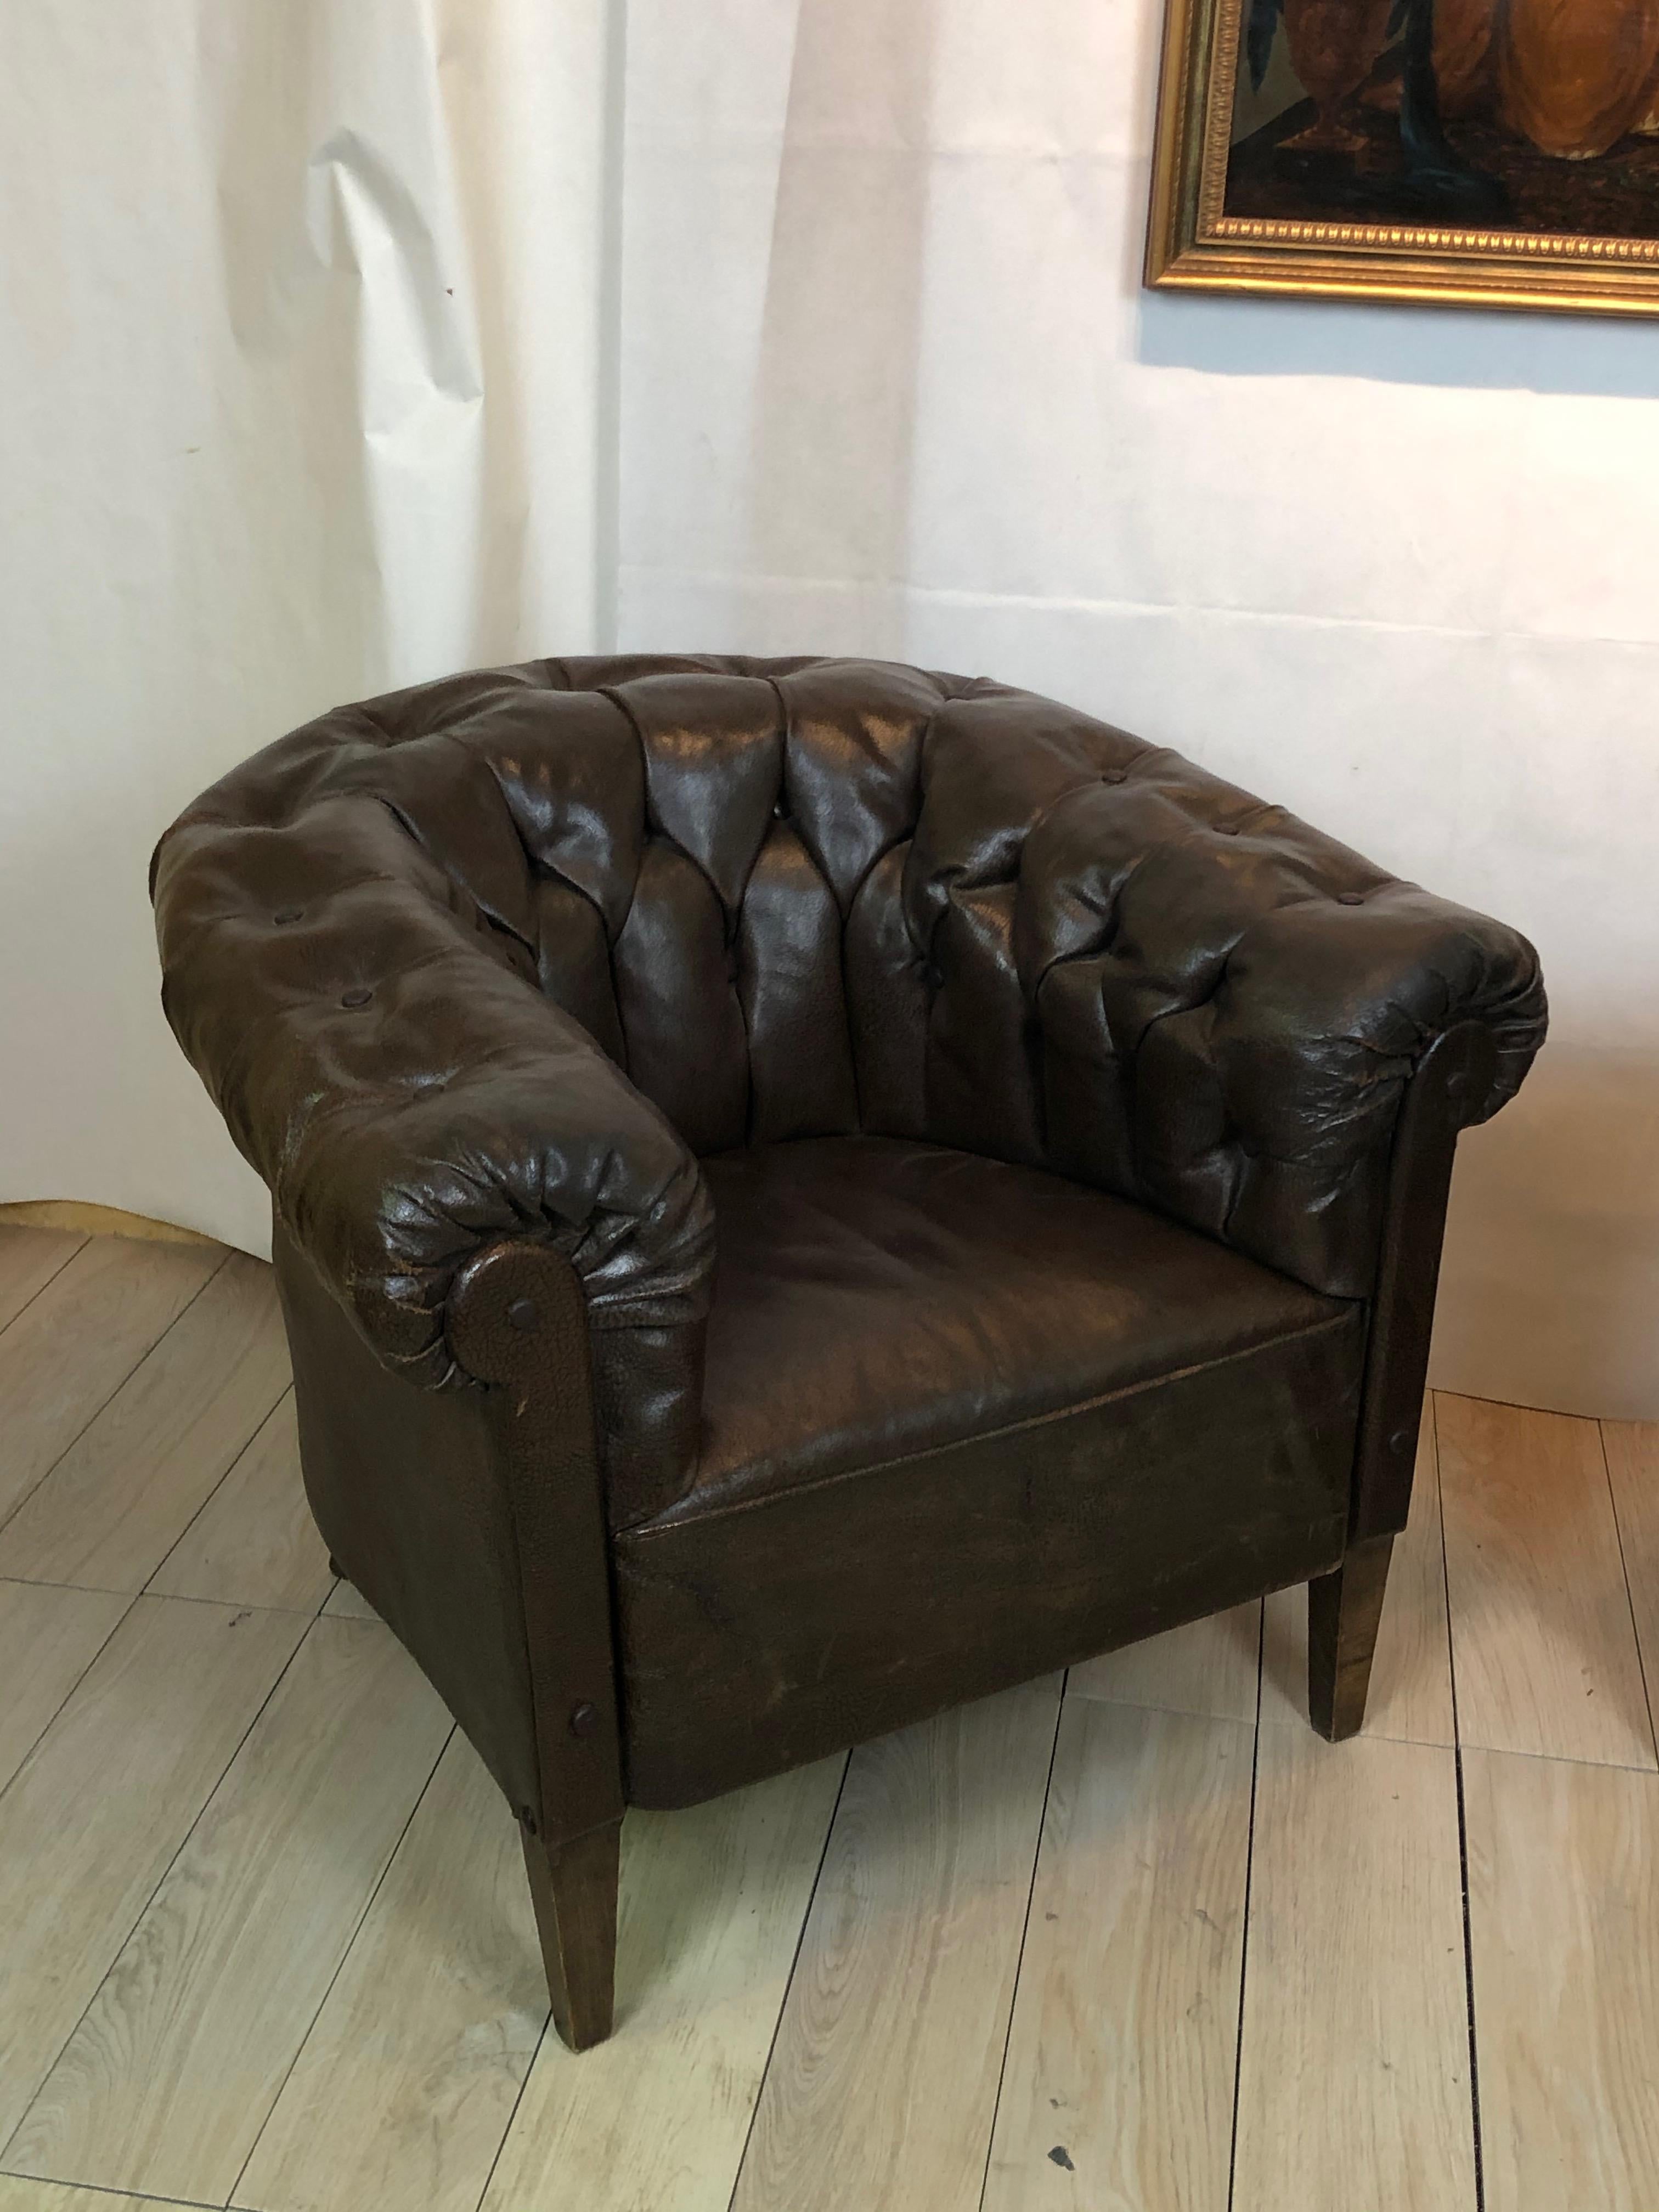 Pair of Chesterfield armchairs from the 1950s in dark brown leather.

Dimensions: Height 90 cm, width 76 cm, depth 67 cm

The timeless design of the Chesterfield style, characterized by its unmistakable capitonné backrest, make this seat an